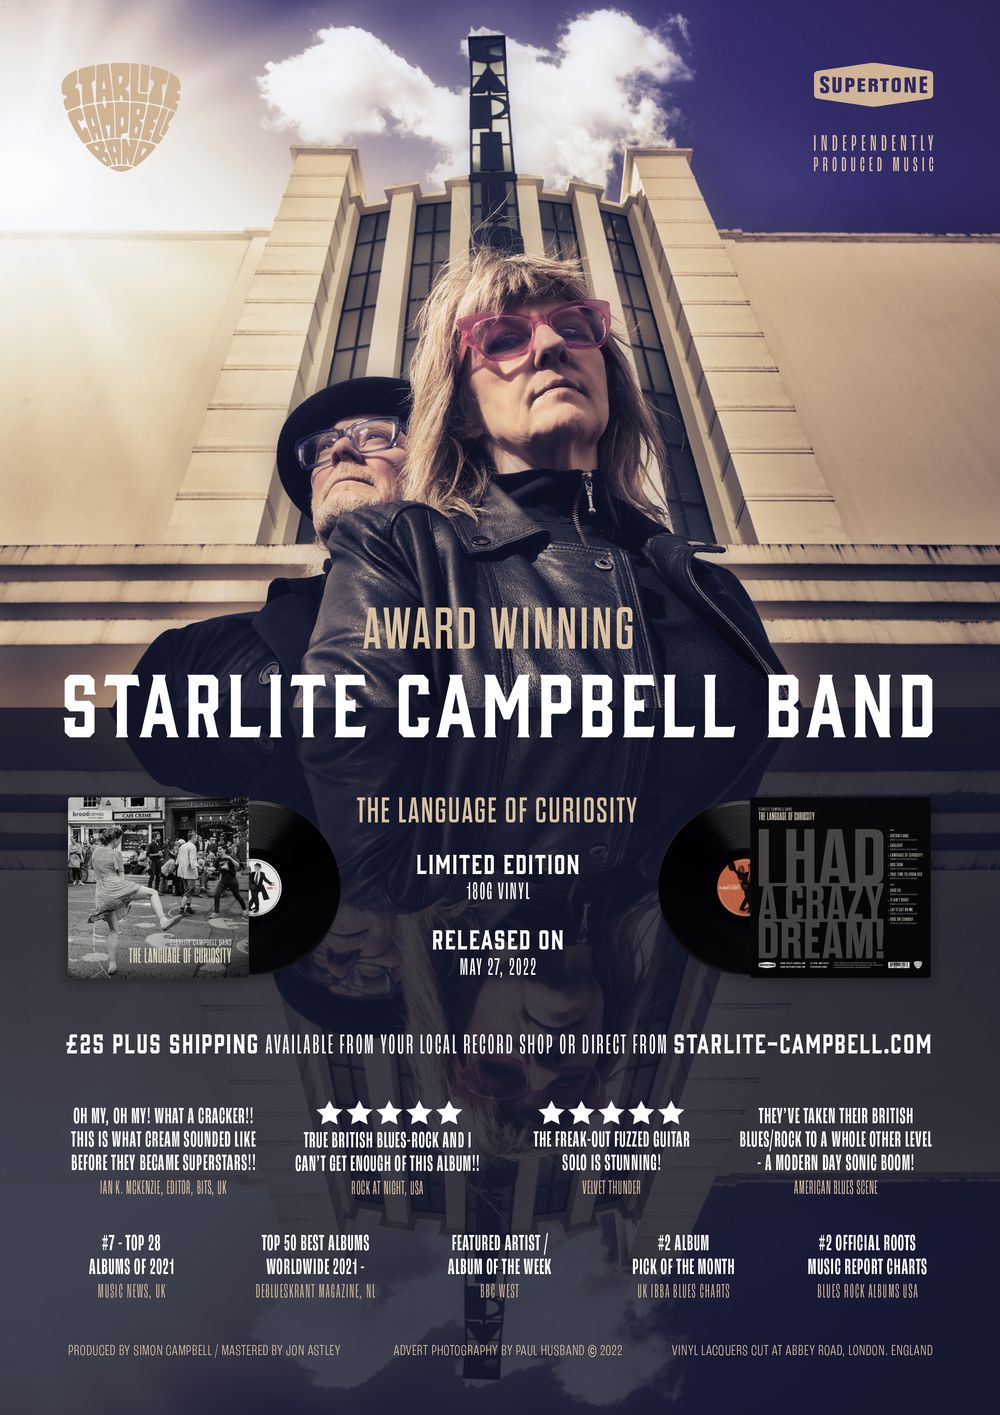 180g vinyl of Starlite Campbell band's new album The Language of Curiosity released May 27, 2022